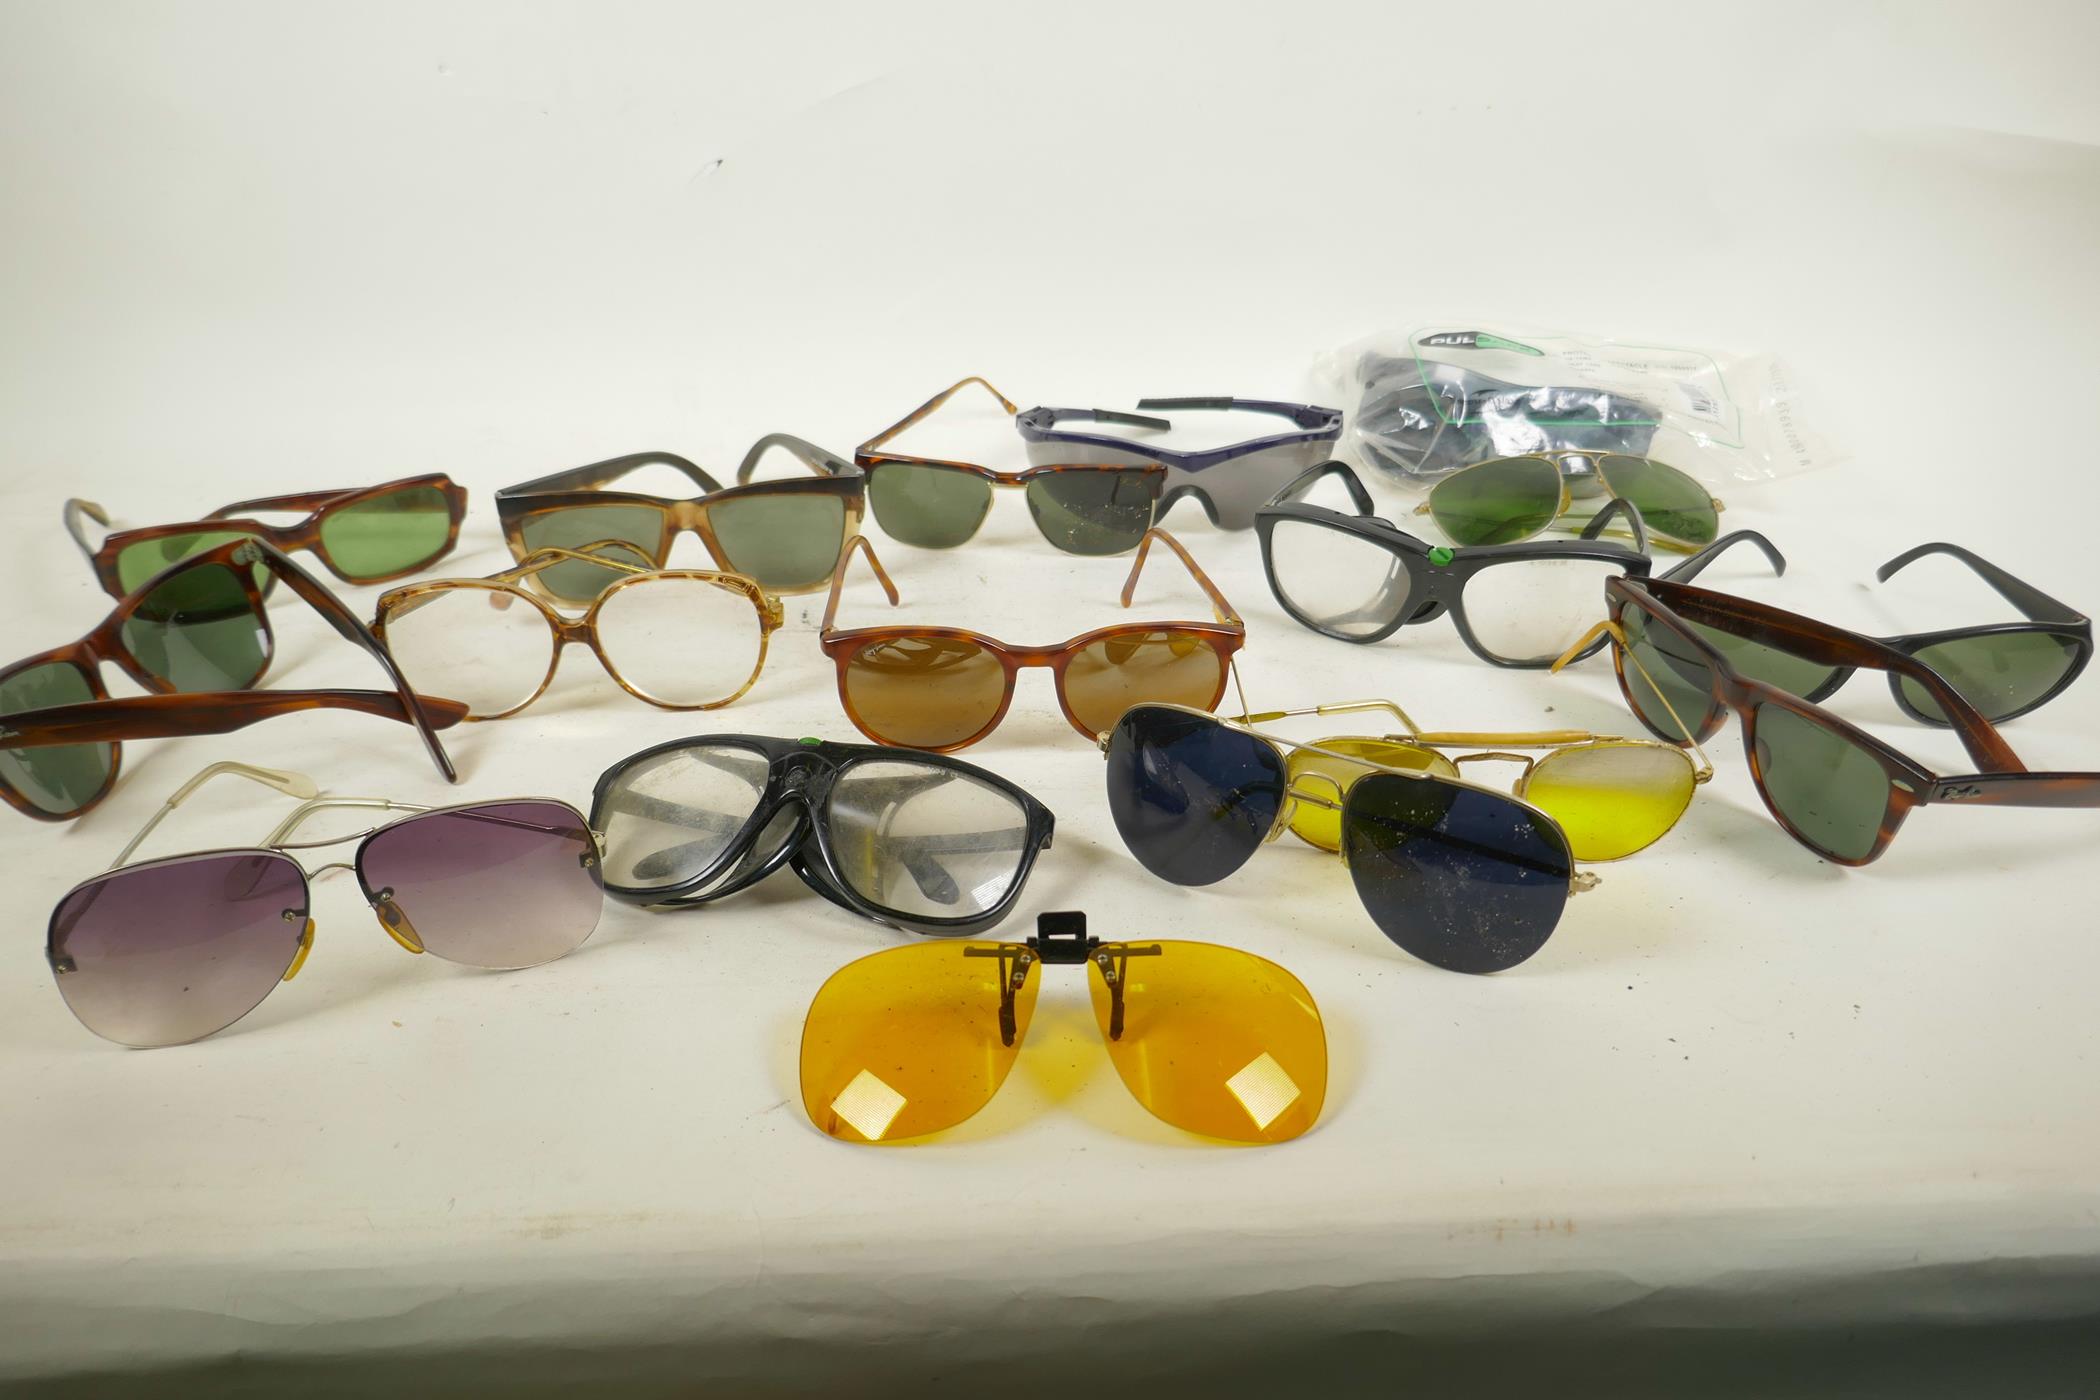 A collection of vintage sunglasses including Ray Bans